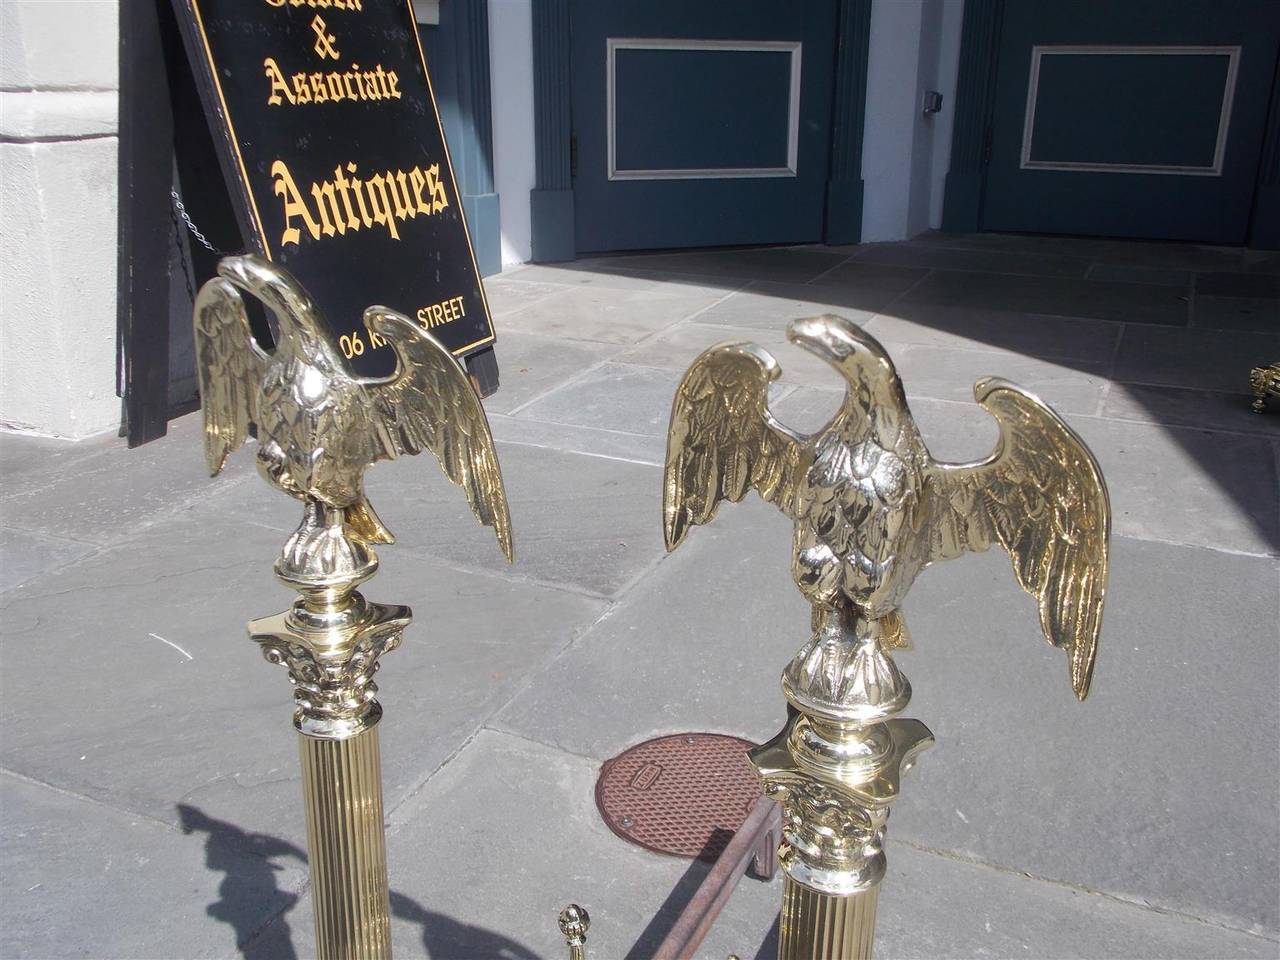 Pair of American brass andirons with perched eagles on top of ball finials, reeded Corinthian column plinths and terminating on scrolled foliage legs with ball feet and original finial log stops. Signed New York, Late 19th century.